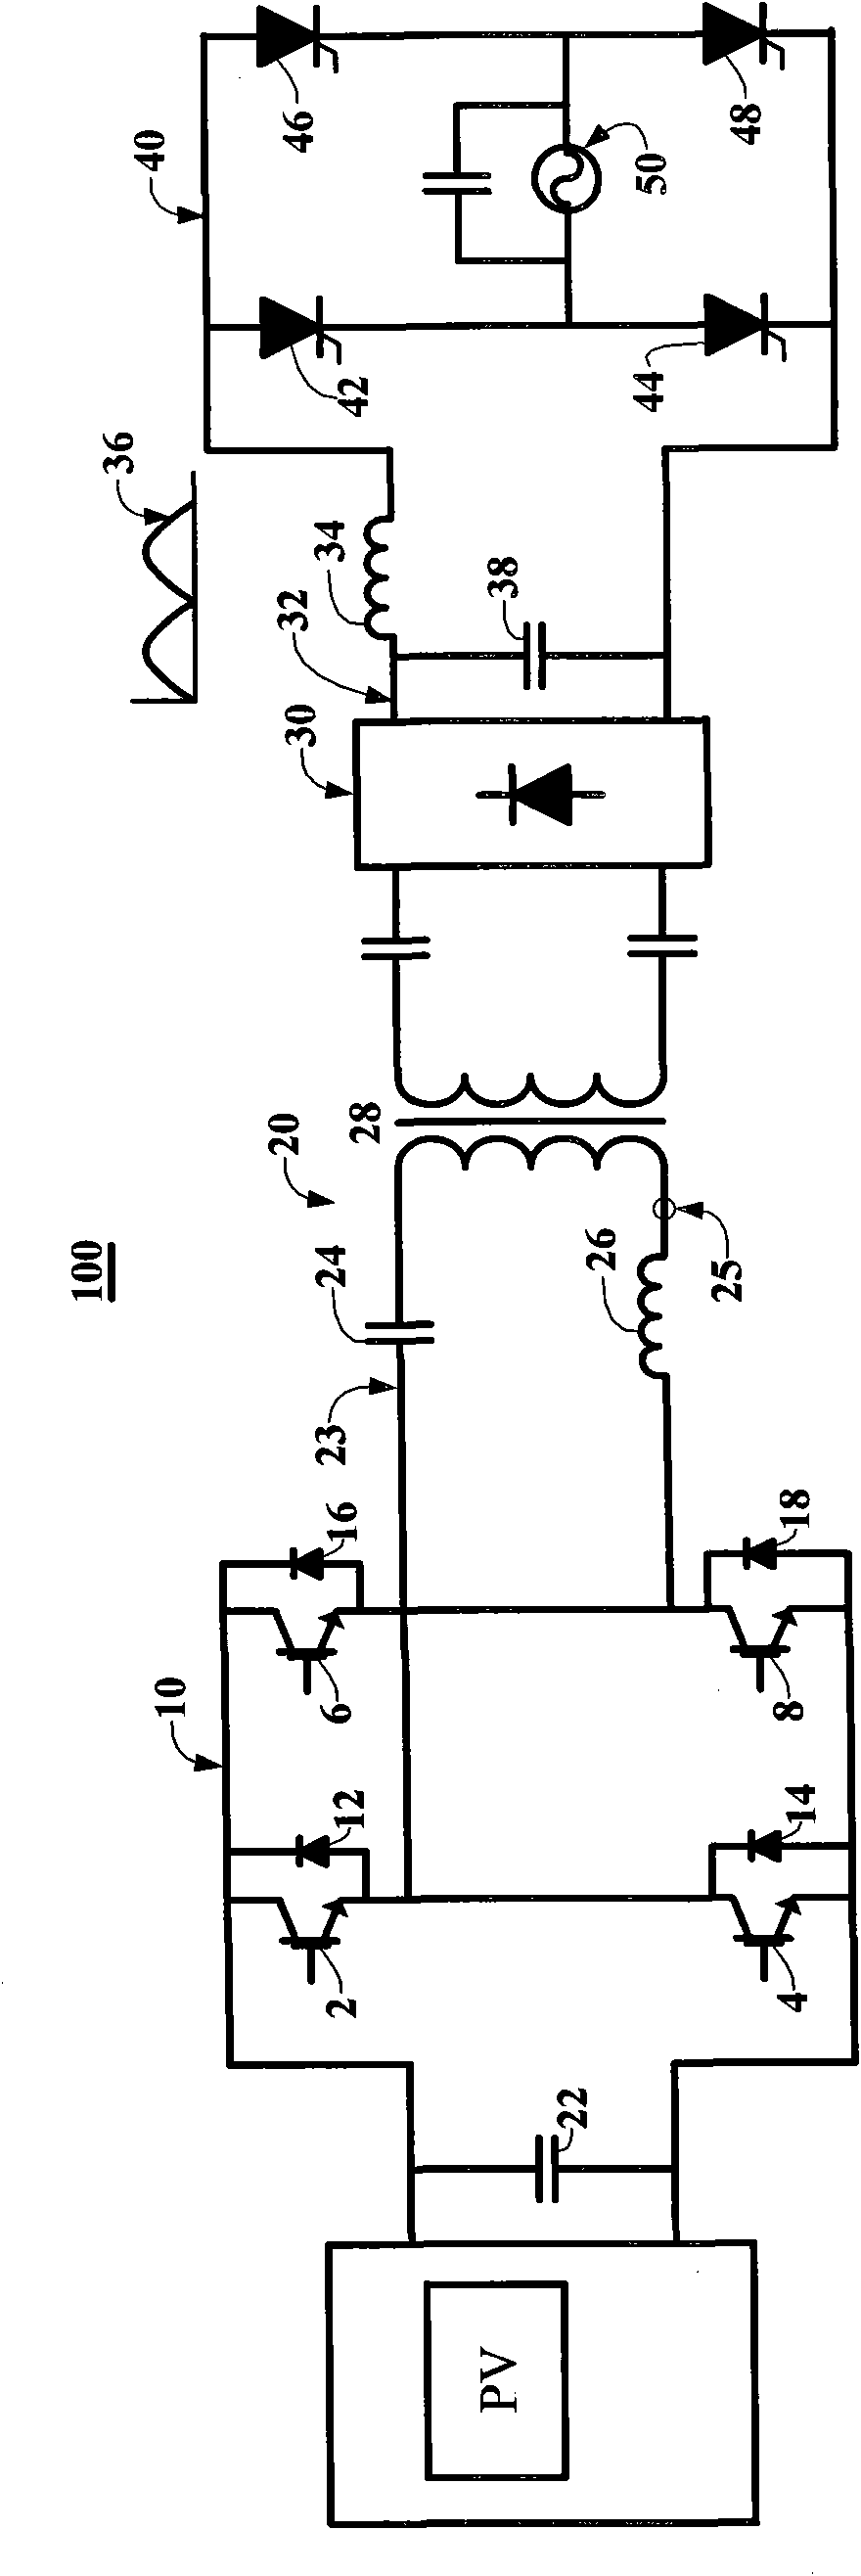 Direct-current tracing control high-power photovoltaic grid-connected inverter